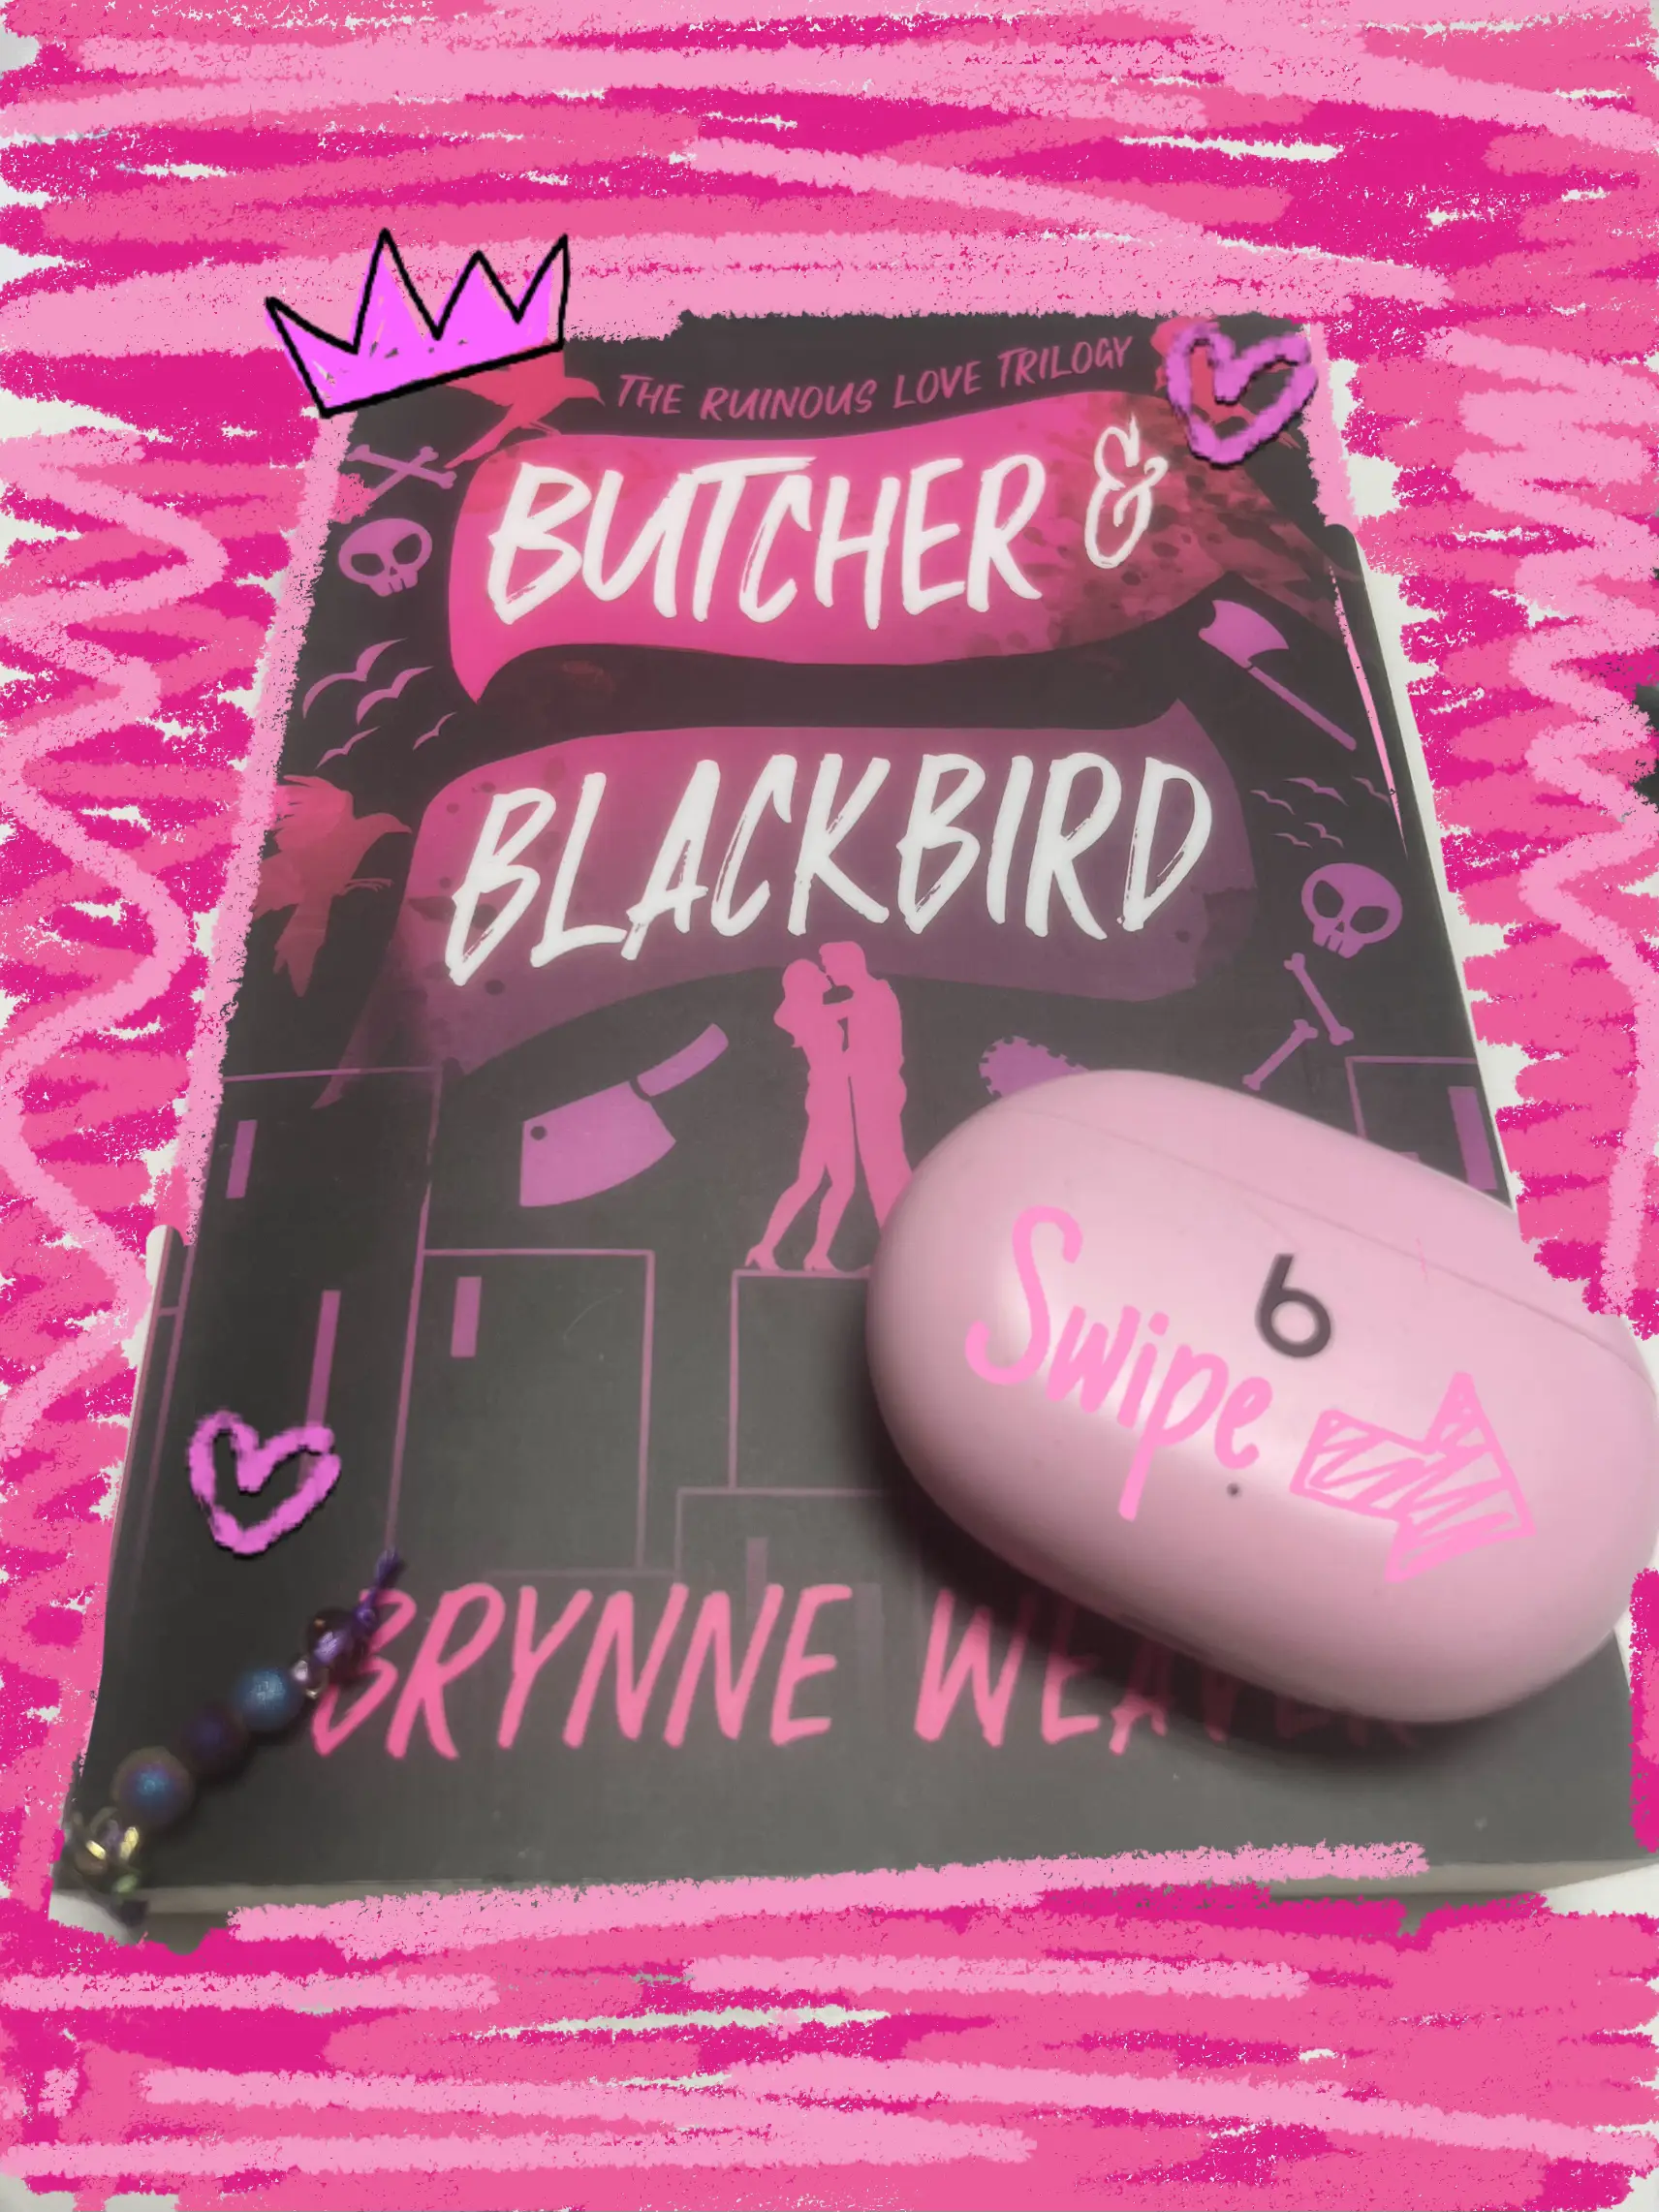 Butcher & Blackbird by Brynne Weaver just me wanting to share my love of  this dark spicy romantic comedy— normally i'm not someone that…